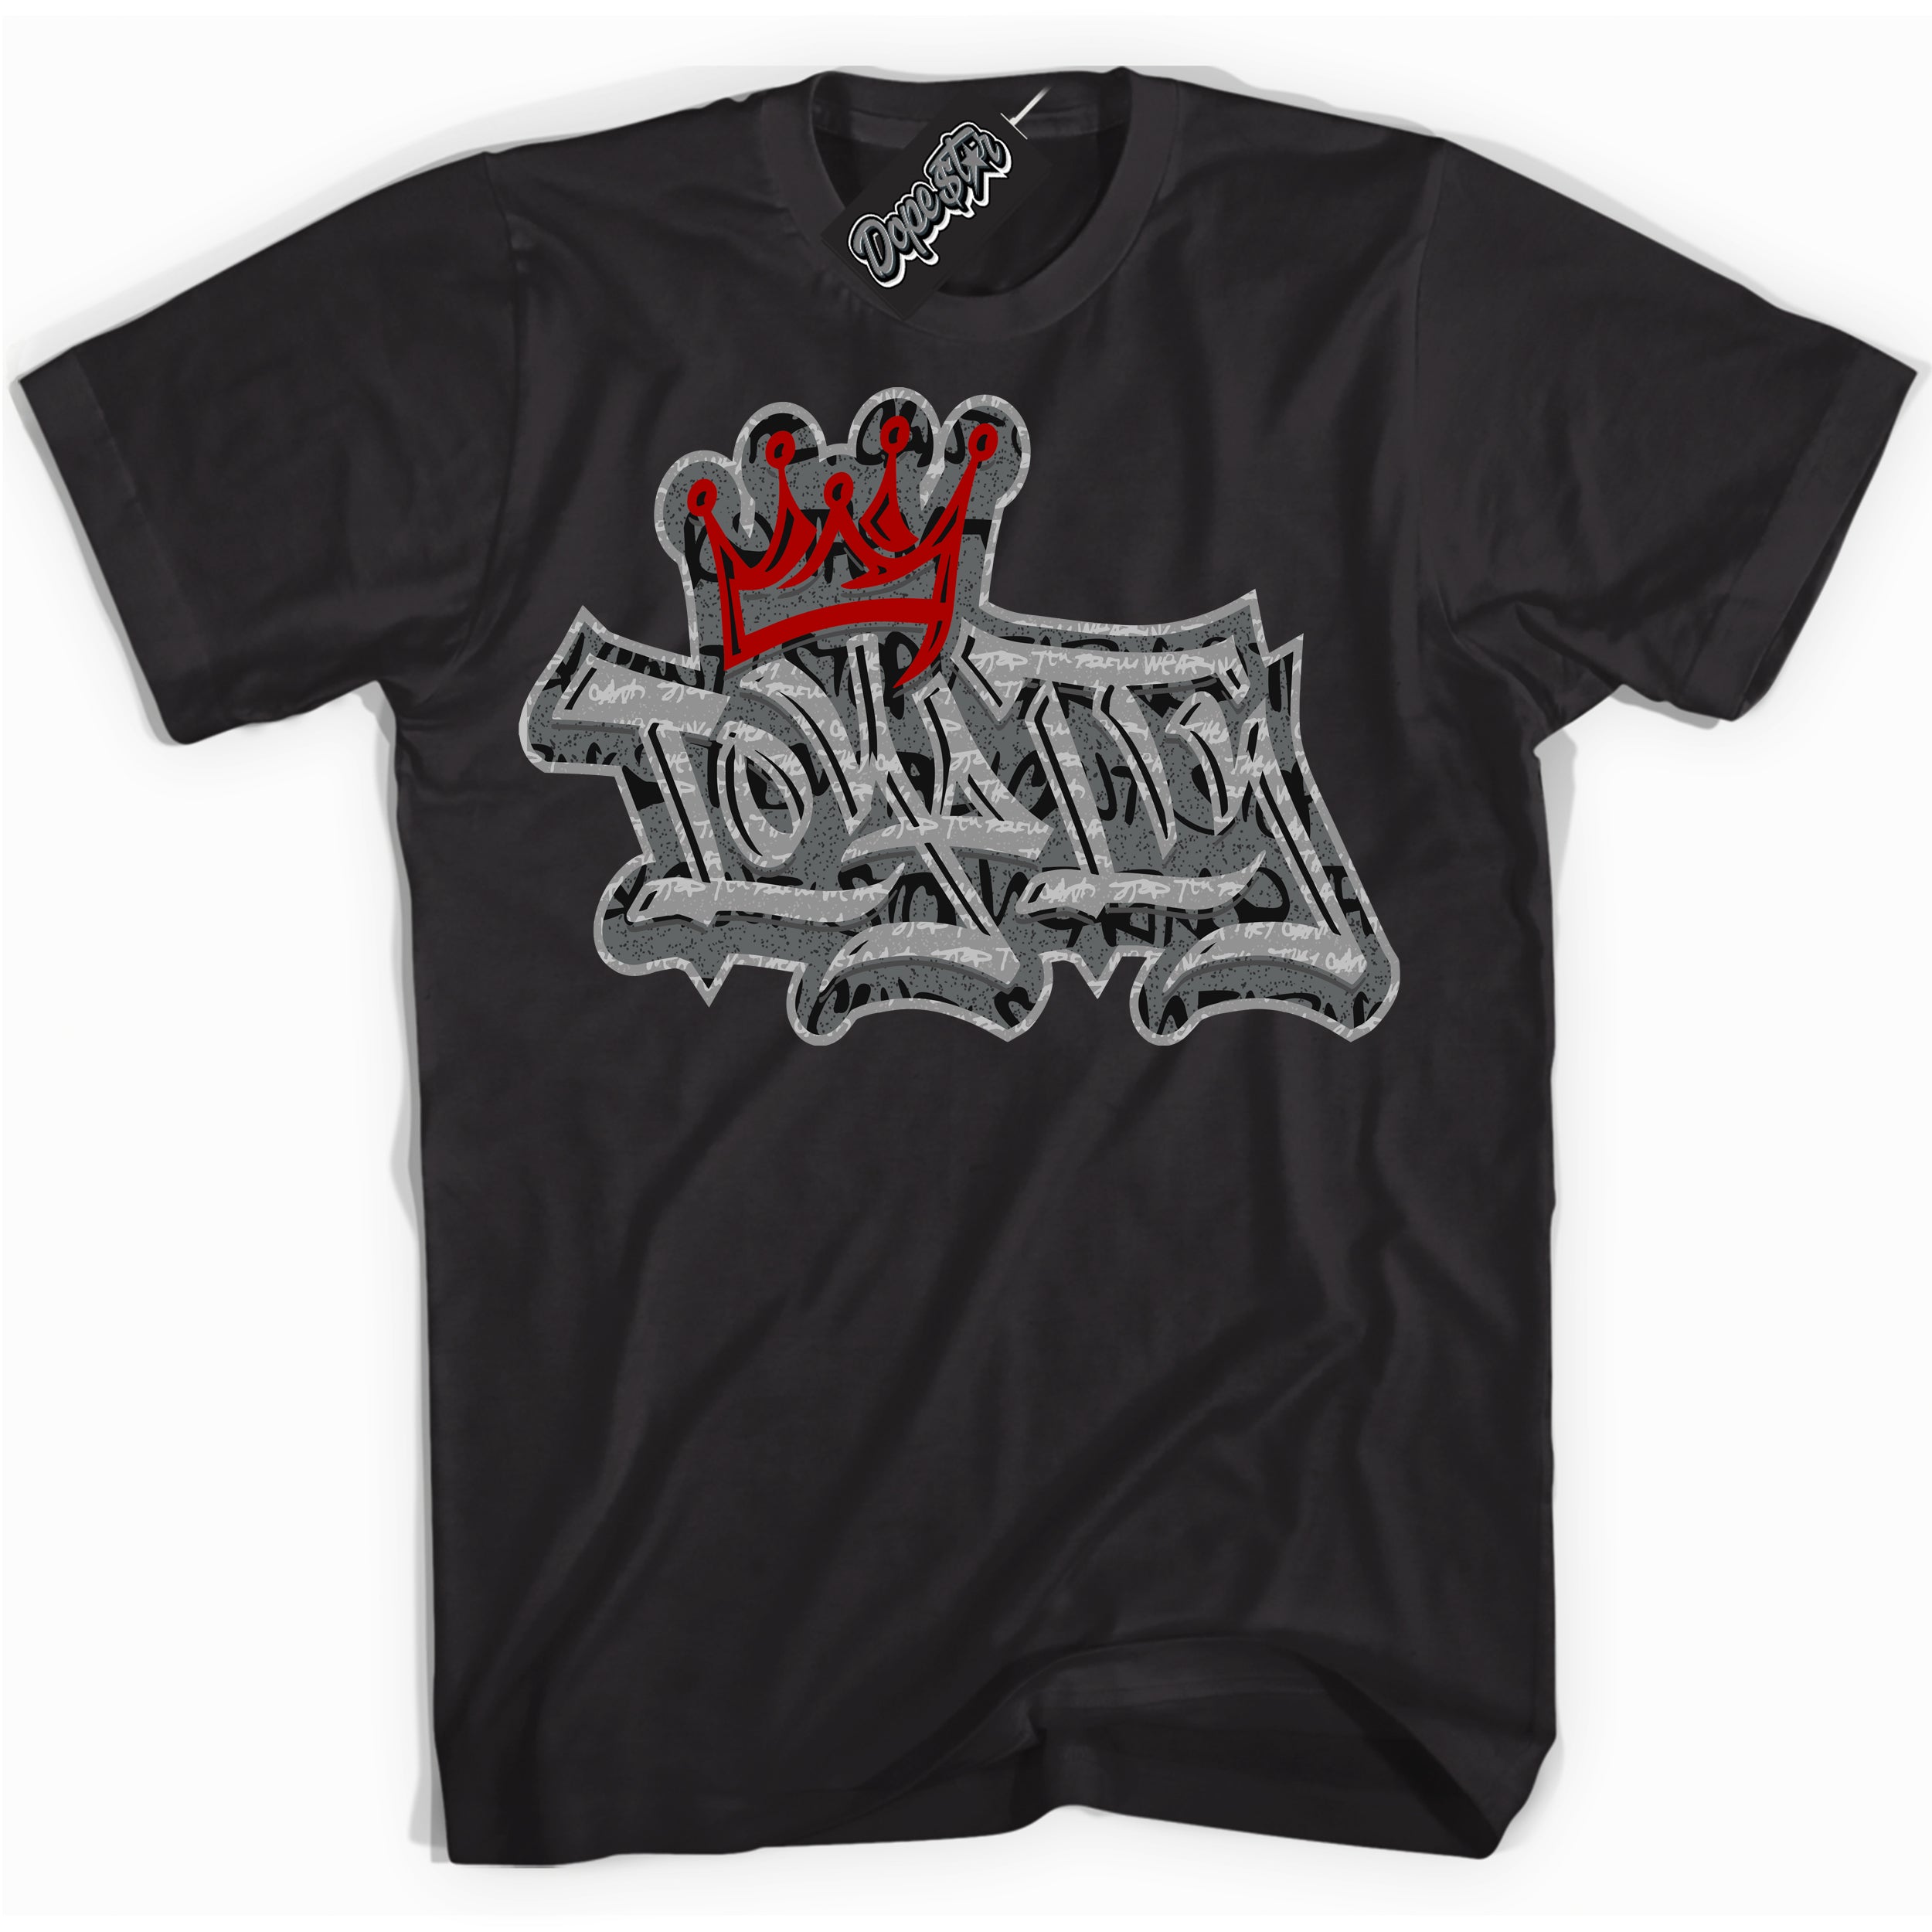 Cool Black Shirt with “ Loyalty Crown ” design that perfectly matches Rebellionaire 1s Sneakers.